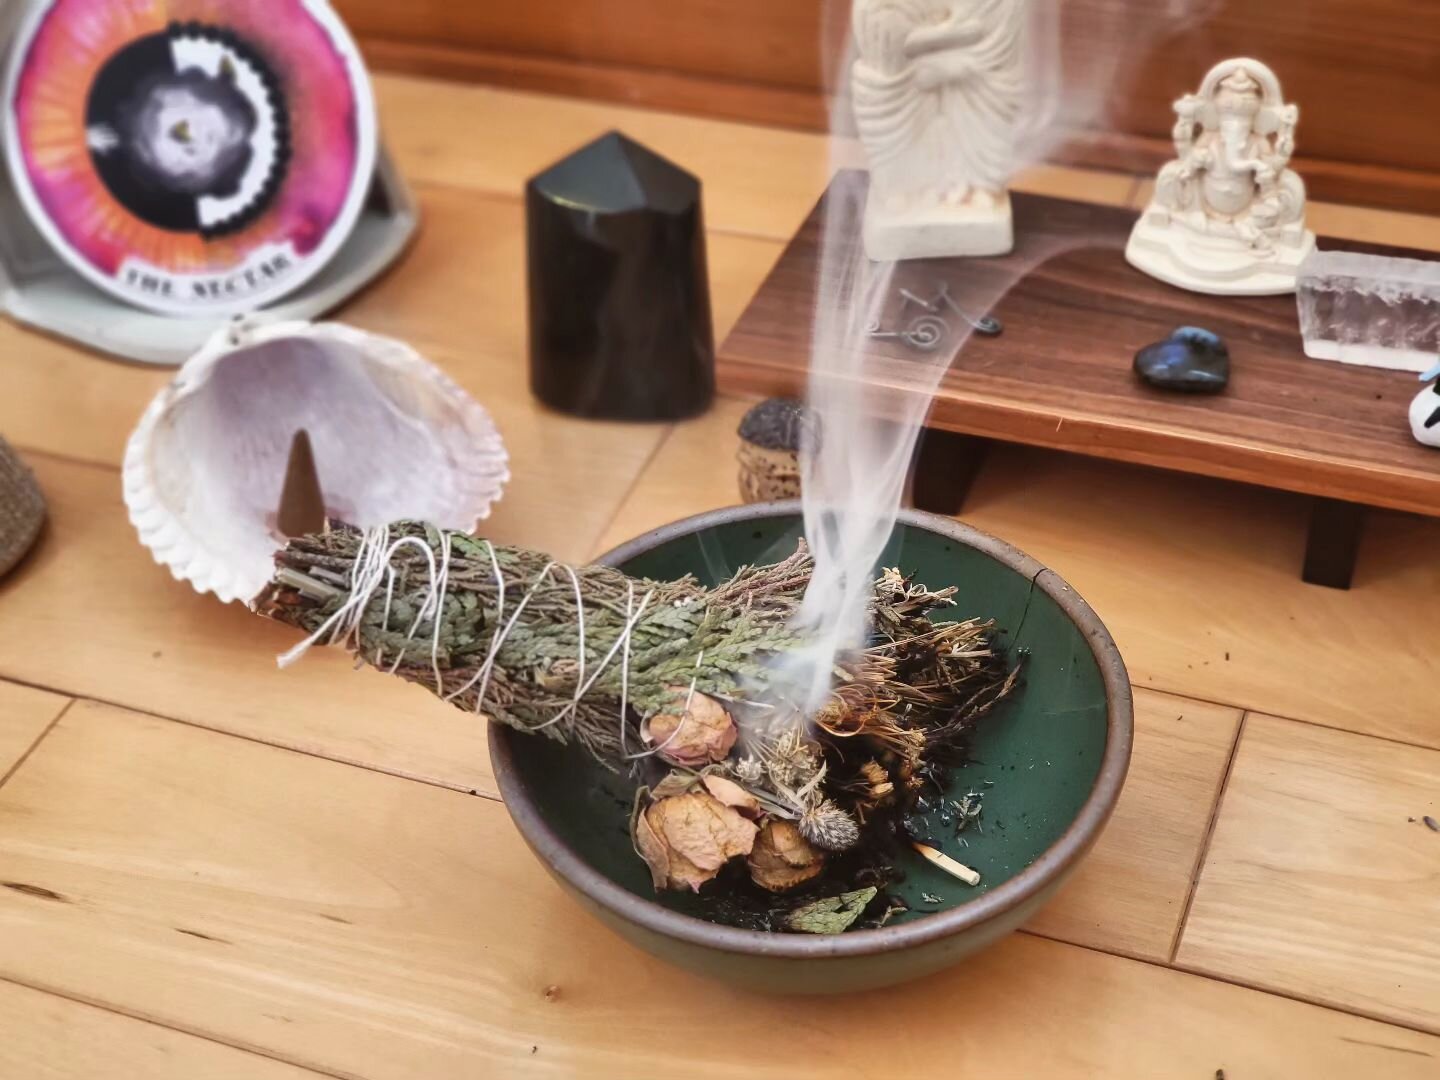 Smoke Cleansing &mdash;is the &quot;burning botanicals, resins, wood, etc. for health and/or spiritual purposes and is an ancient practice that is common in a wide variety of cultures and faiths around the world.&quot;

Whether I'm using a burn bundl